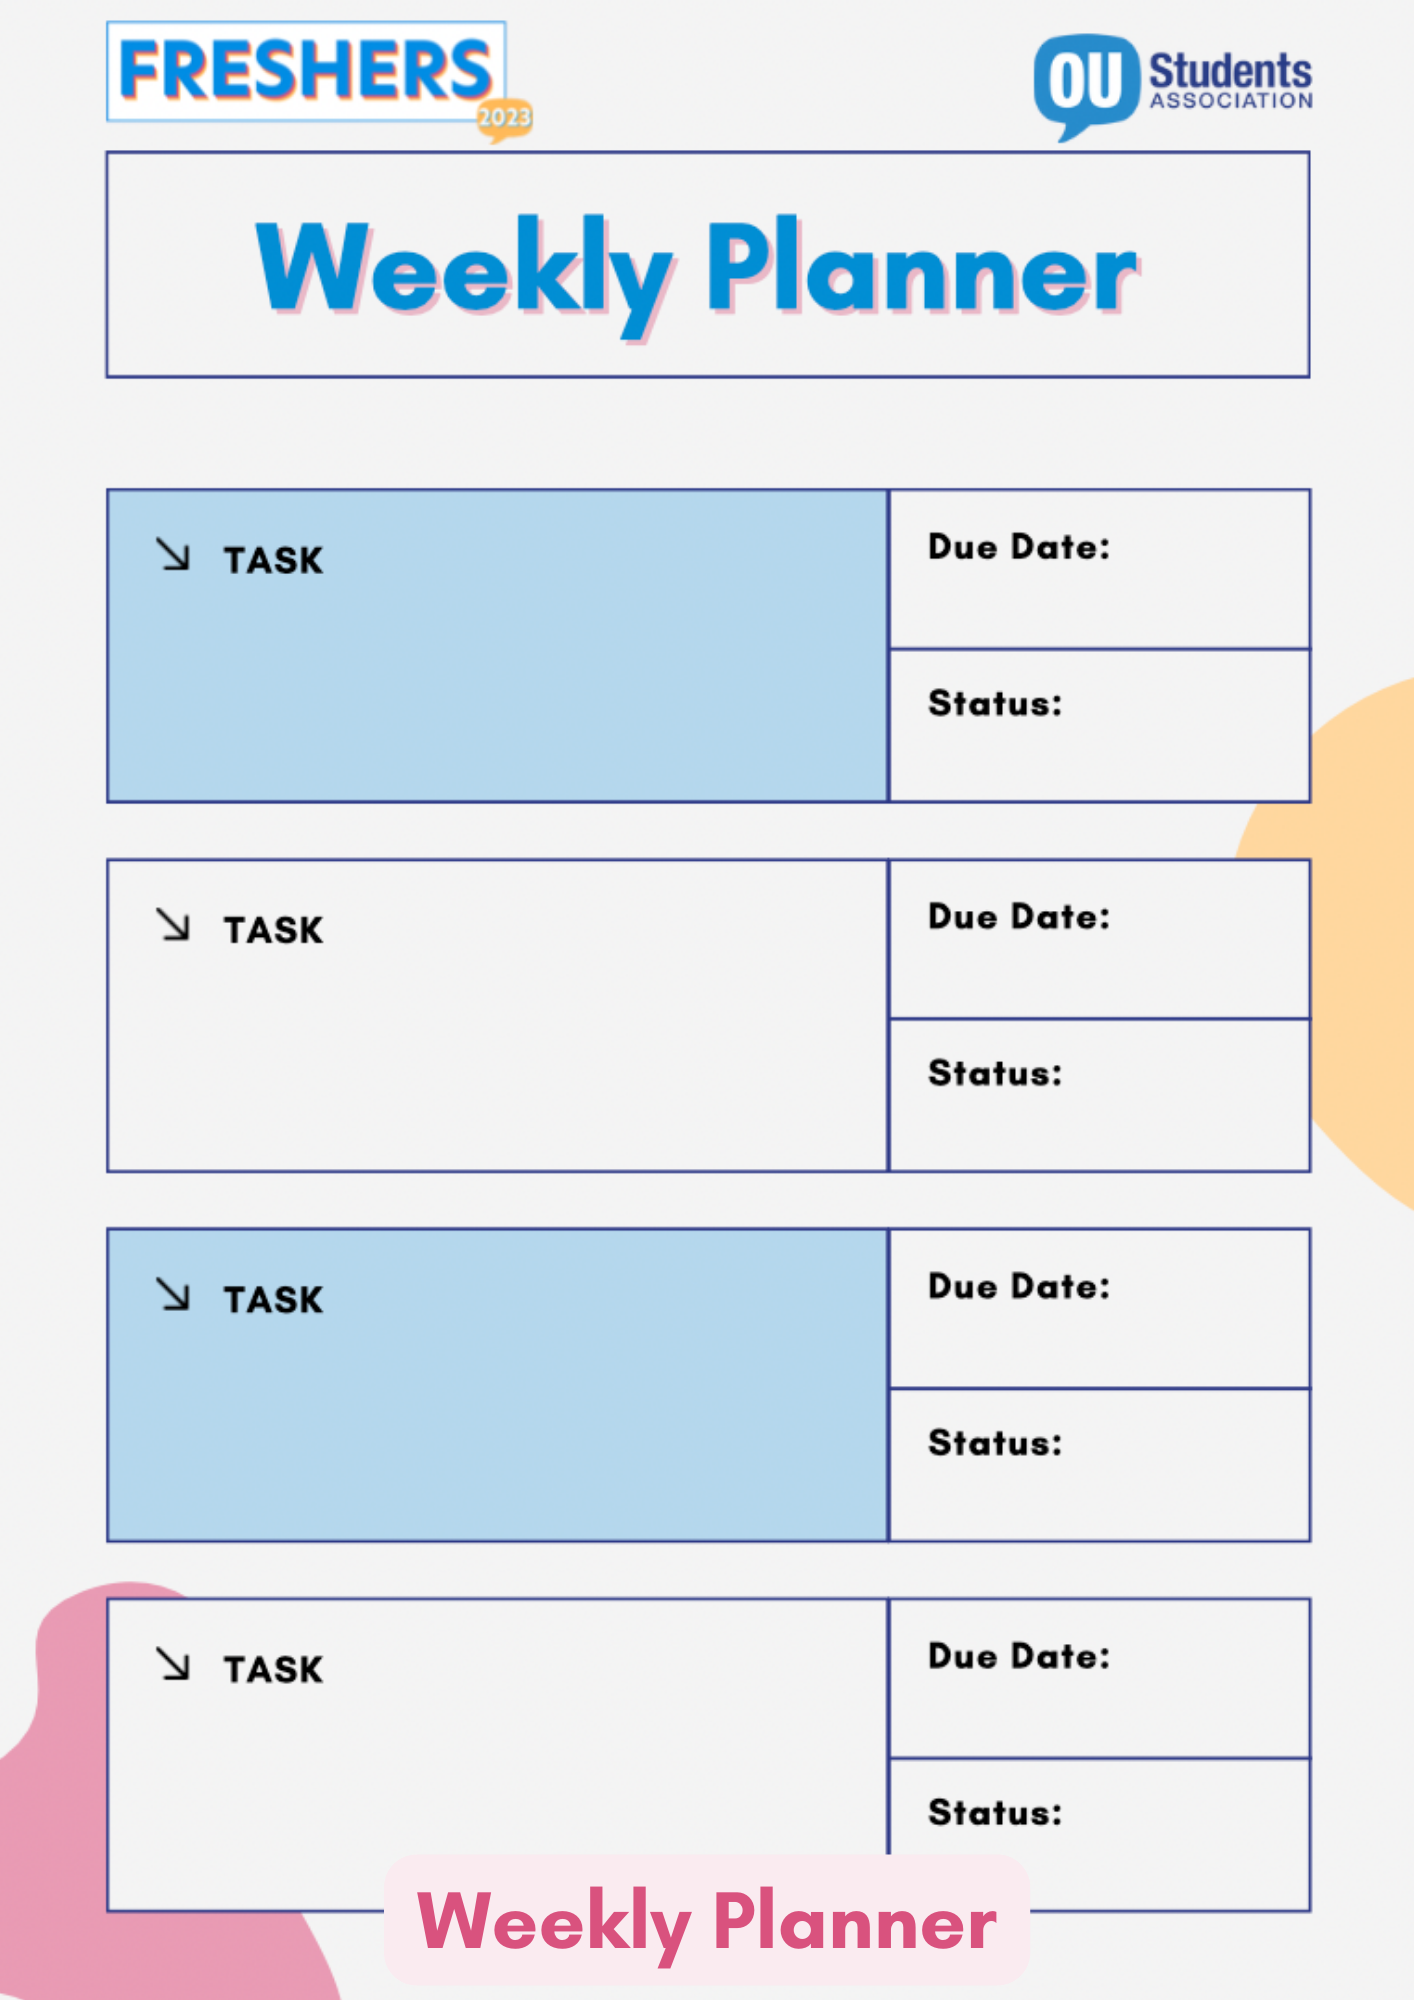 Image reads: Weekly planner. There is space on this planner to write your weekly tasks, due date and status.